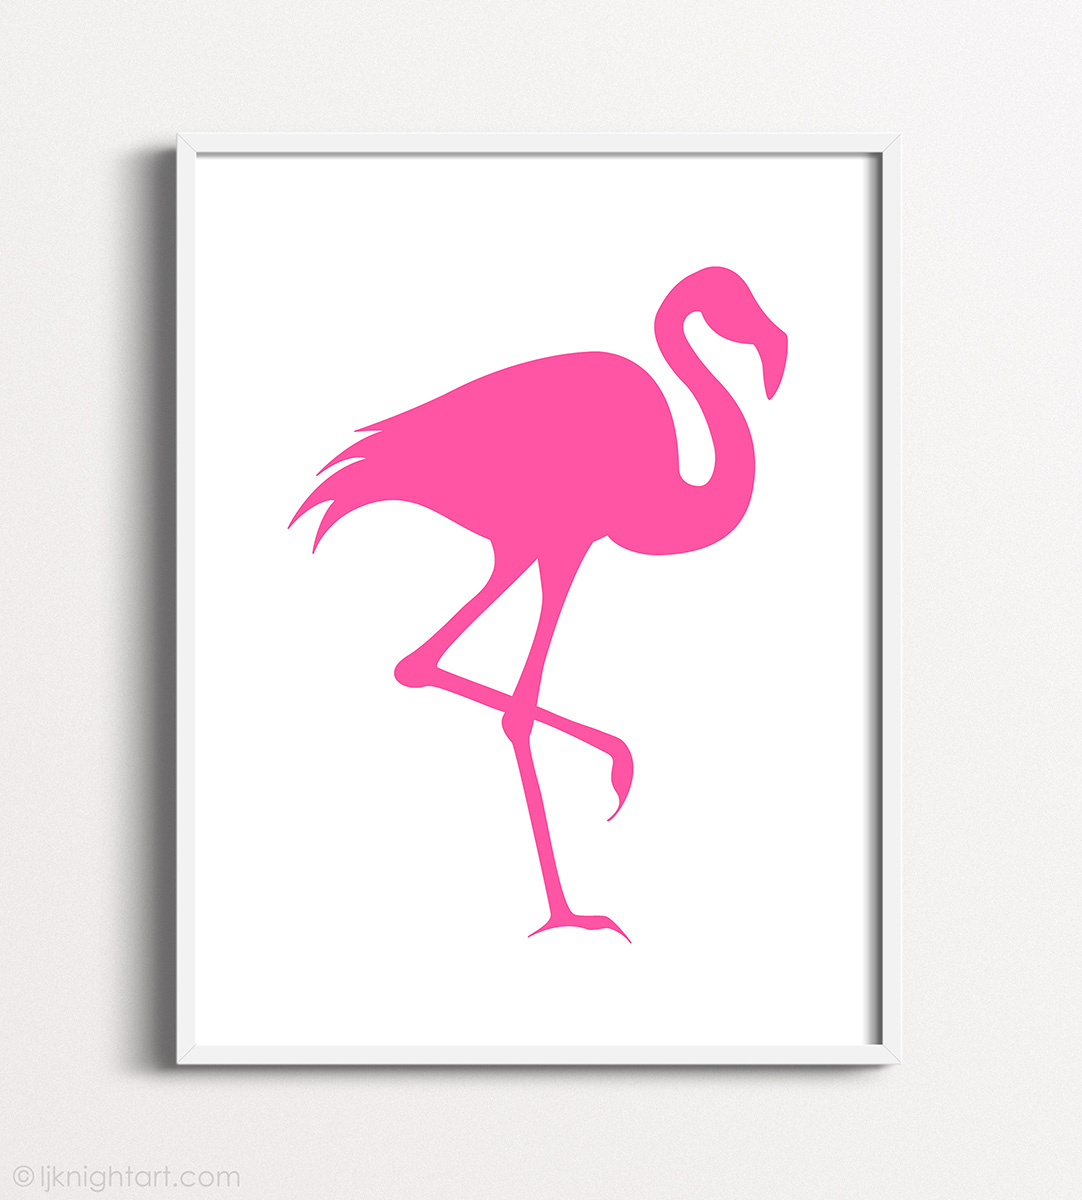 Monochrome wall art with an elegant flamingo silhouette in hot pink against a simple white background